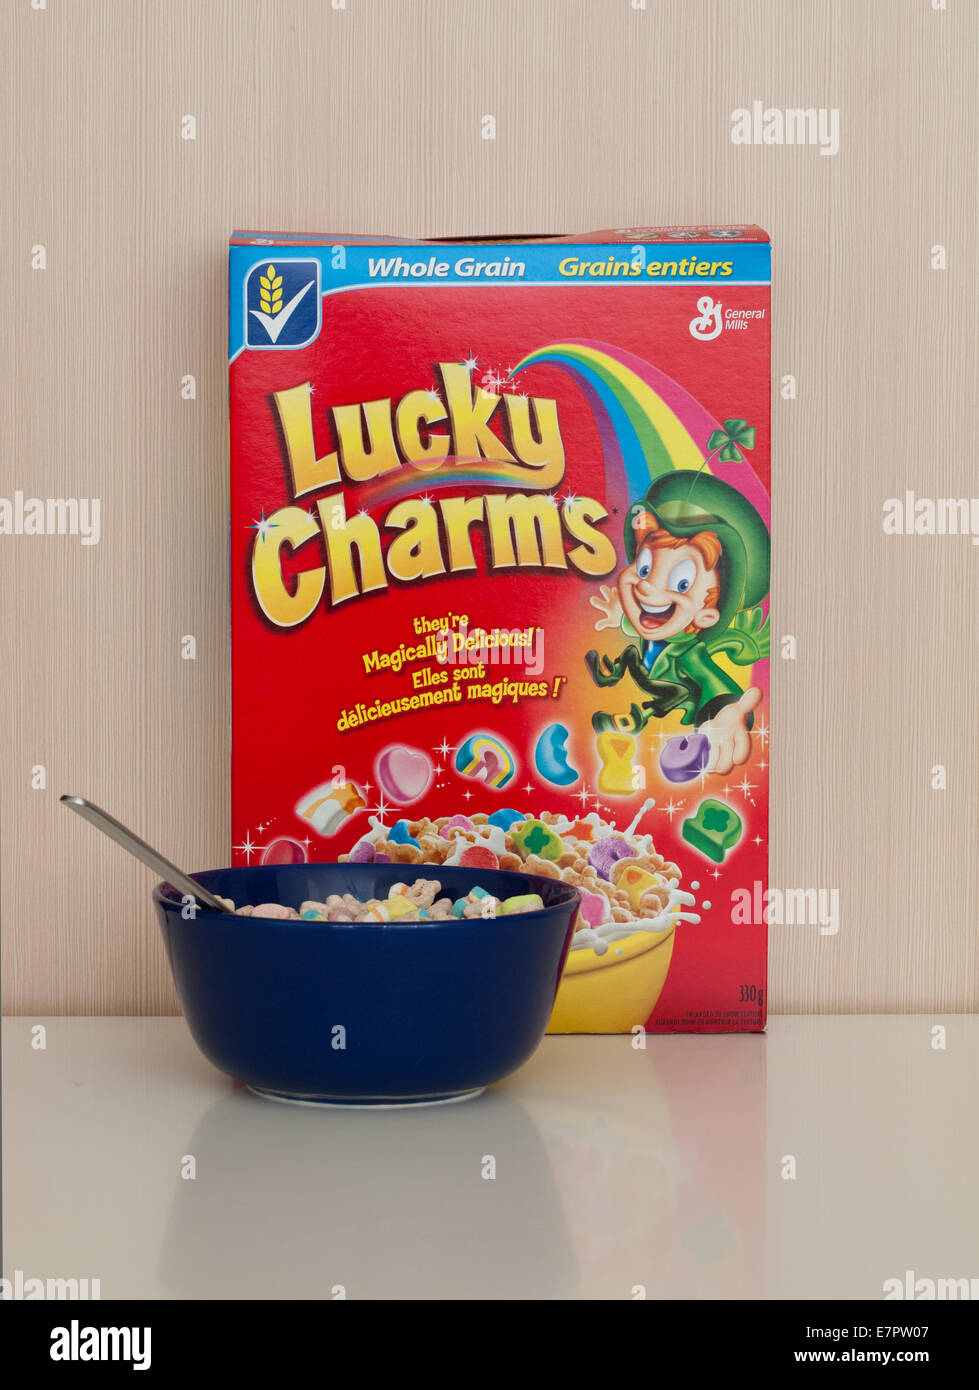 A box and bowl of Lucky Charms cereal, produced by General Mills, Inc. Stock Photo